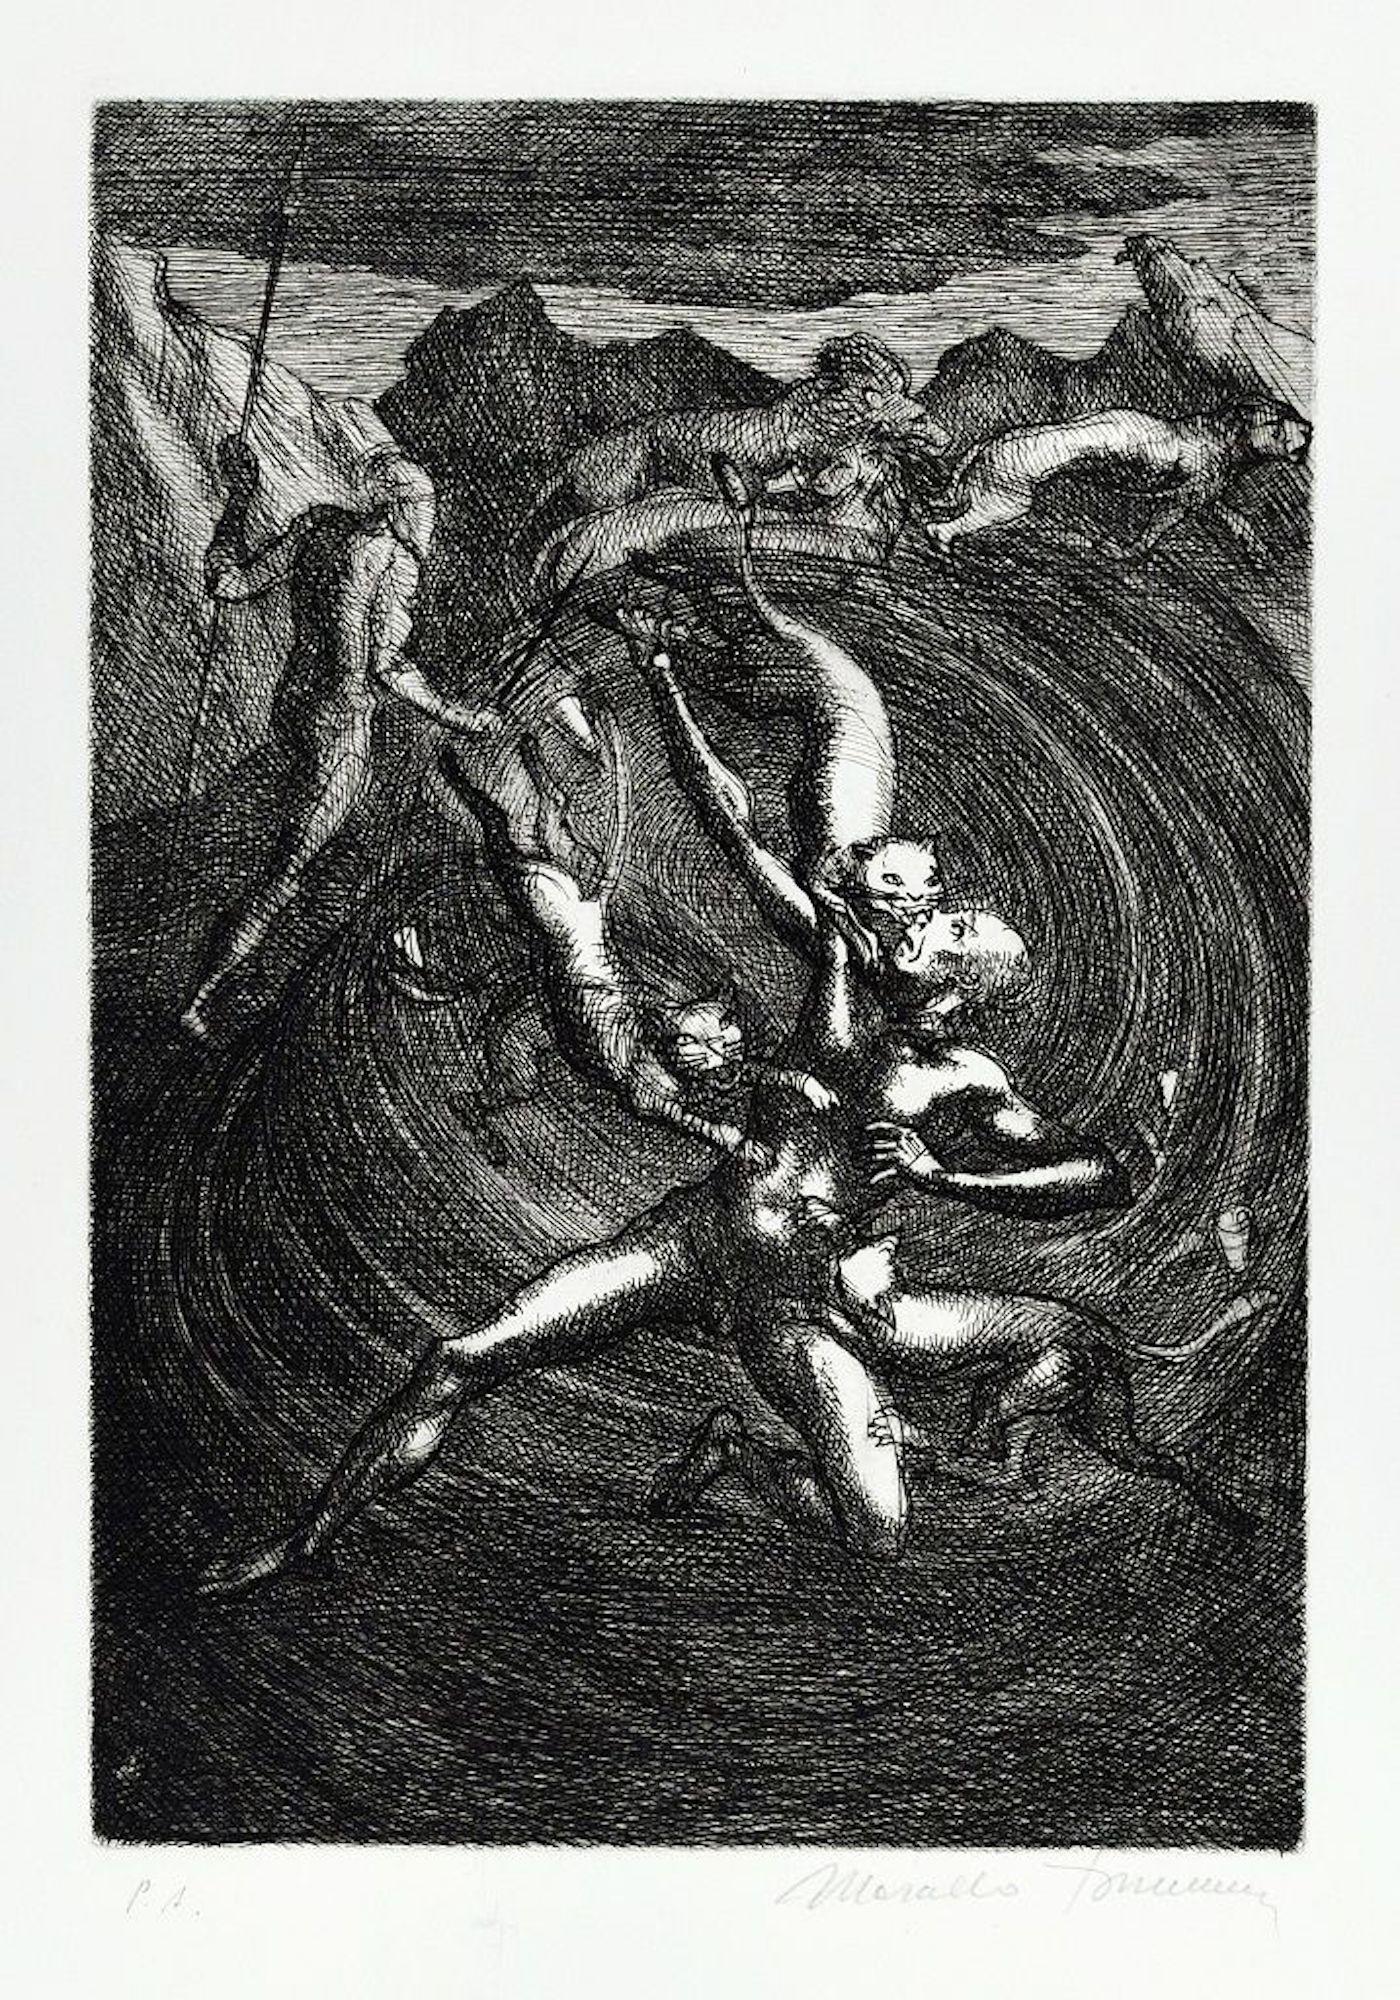 Marcello Tommasi Figurative Print - Untitled - From "Don Chisciotte" - Original Etching by M. Tommasi - 1970